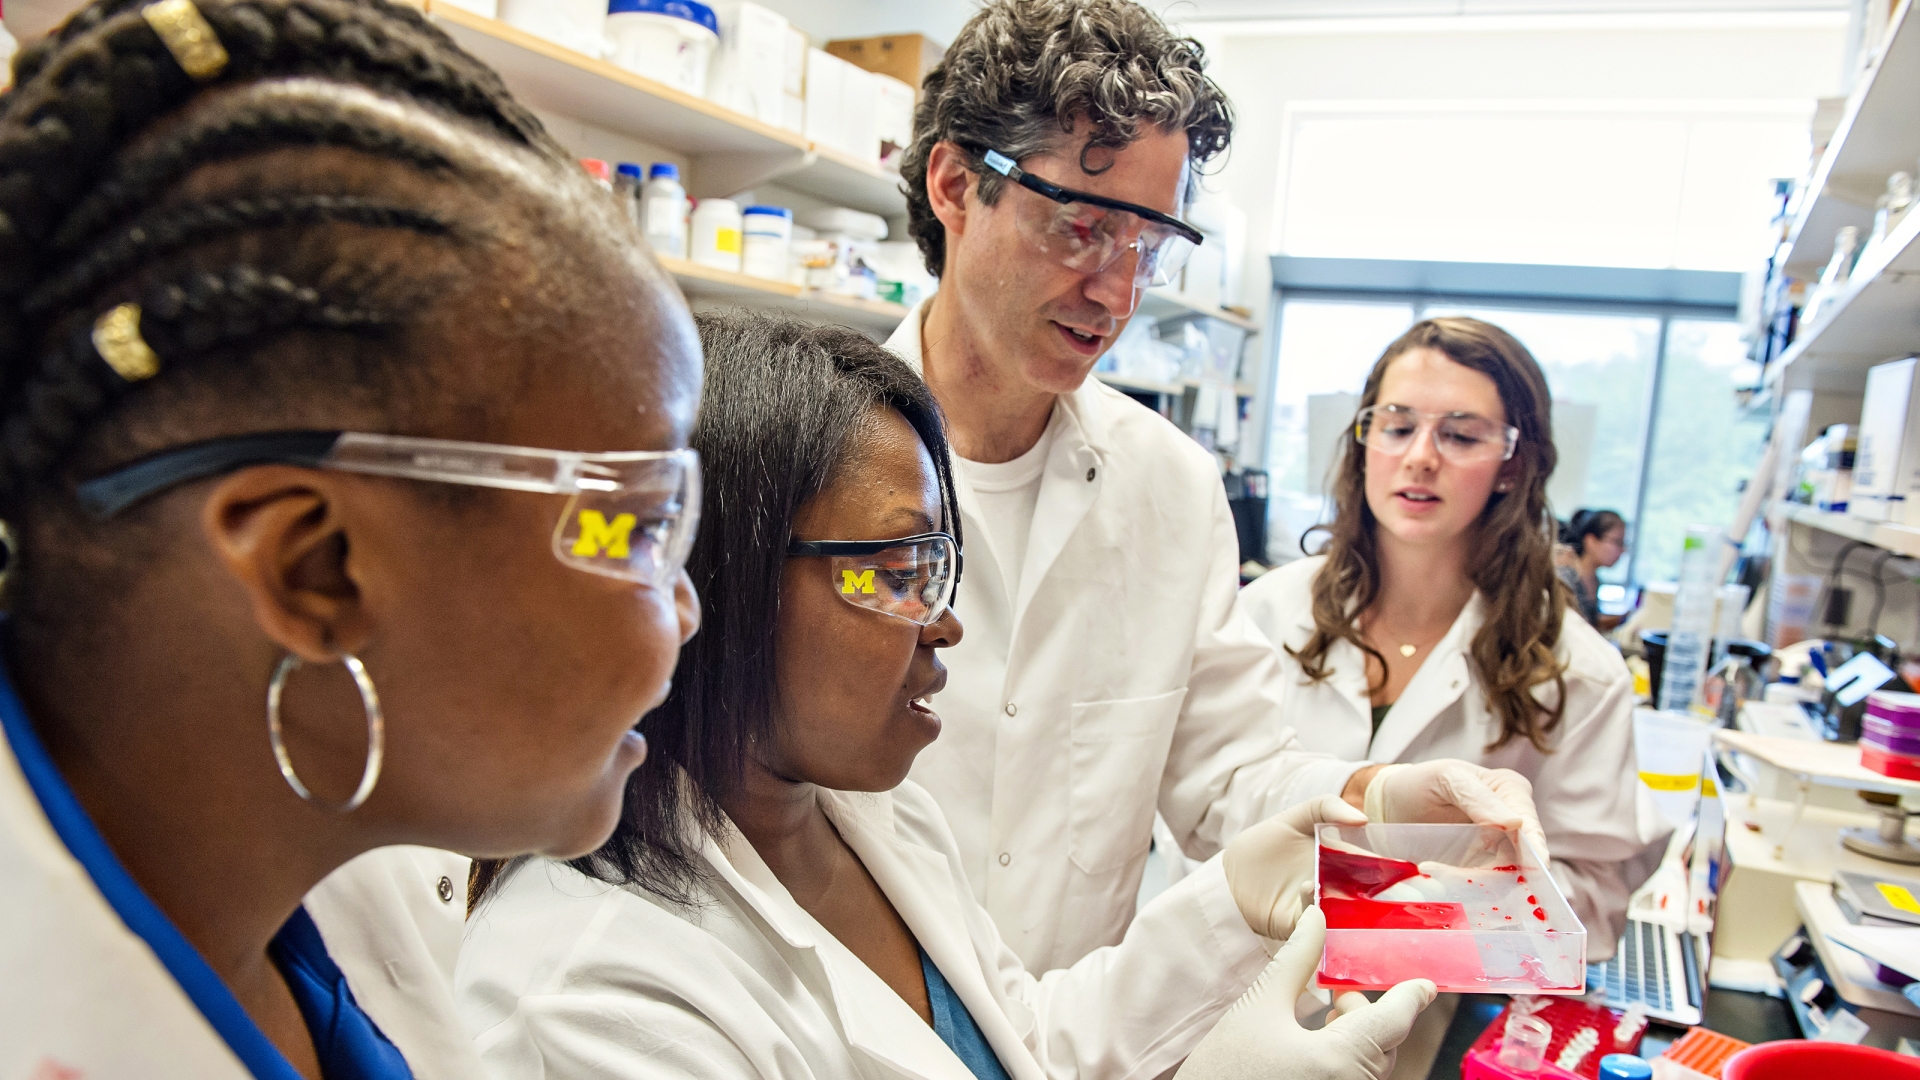 Group of four people in a research lab wearing goggles and white lab coats: one white male, one white female and two black females